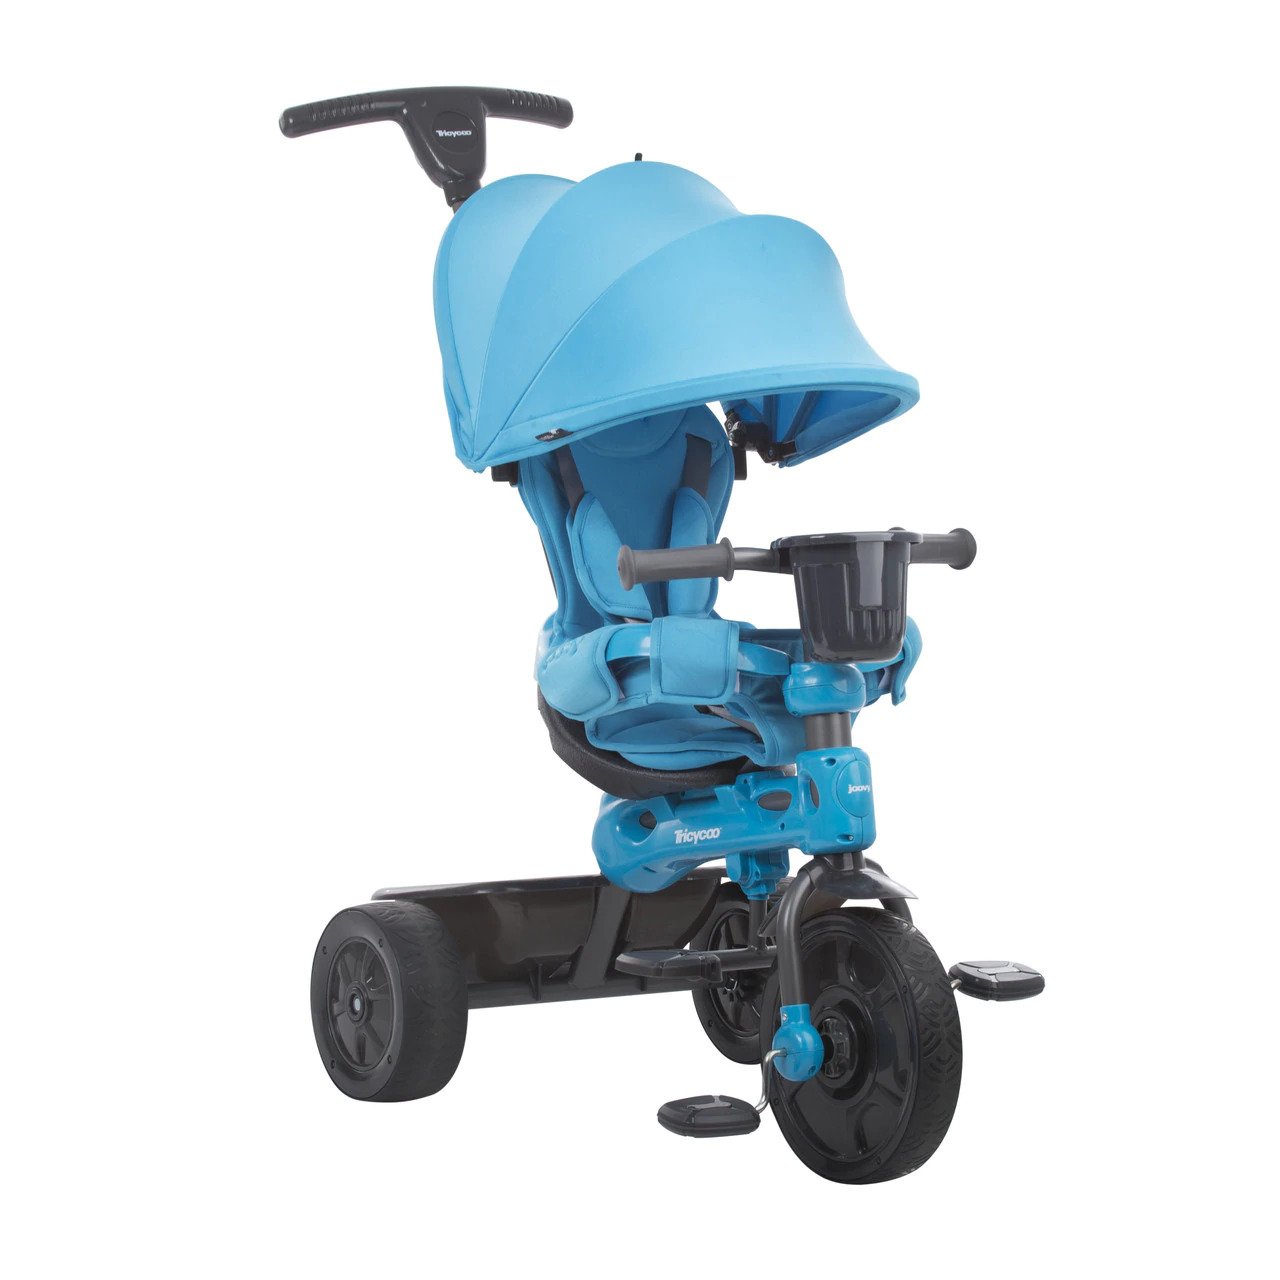 A blue stroller with a blue canopy